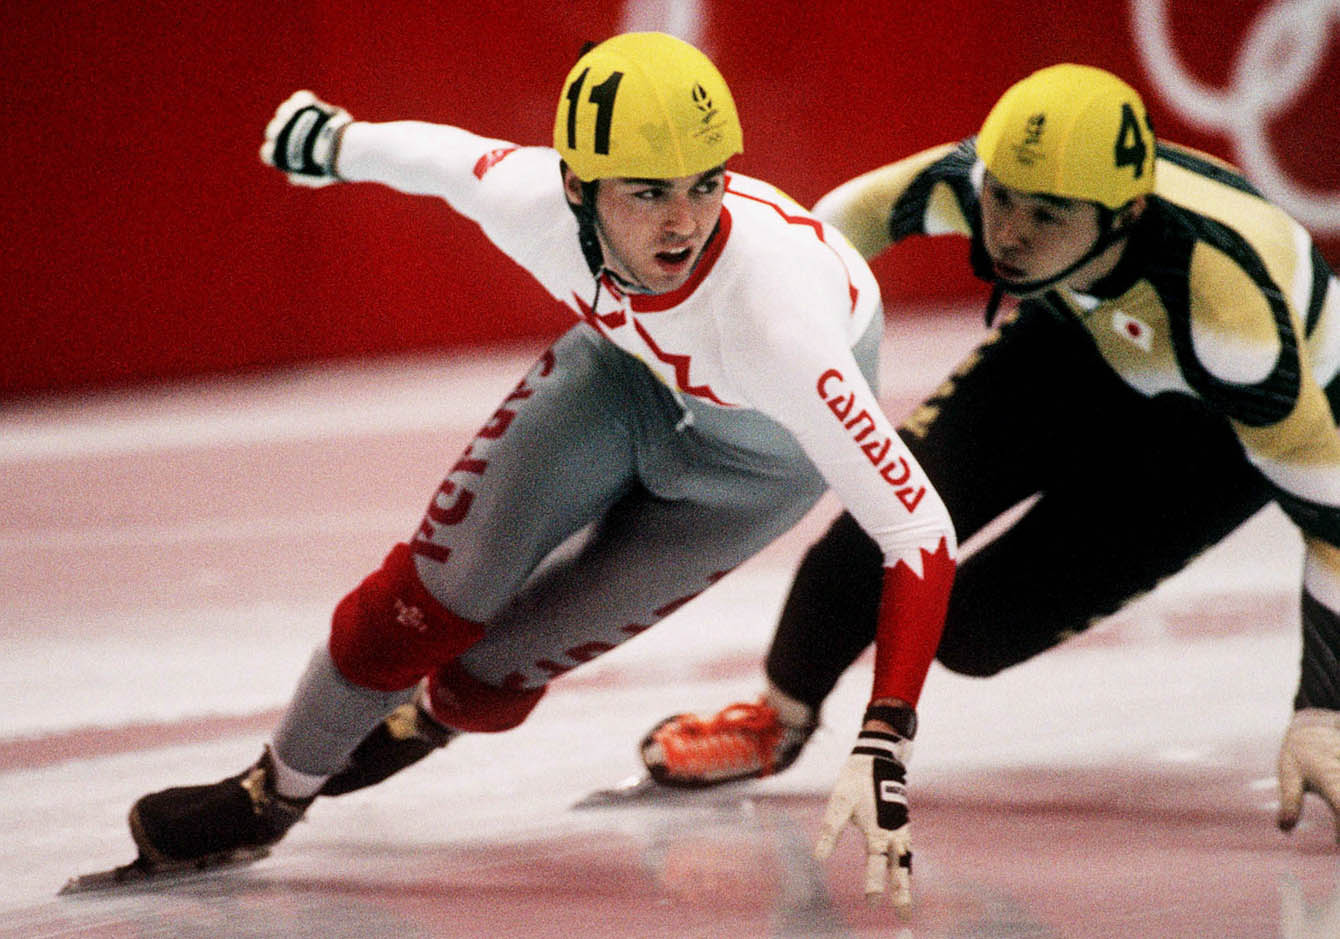 Canada's Frederic Blackburn (left) competing in the short track speed skating event at the Albertville 1992 Olympic Winter Games. (CP PHOTO/COC/Ted Grant)